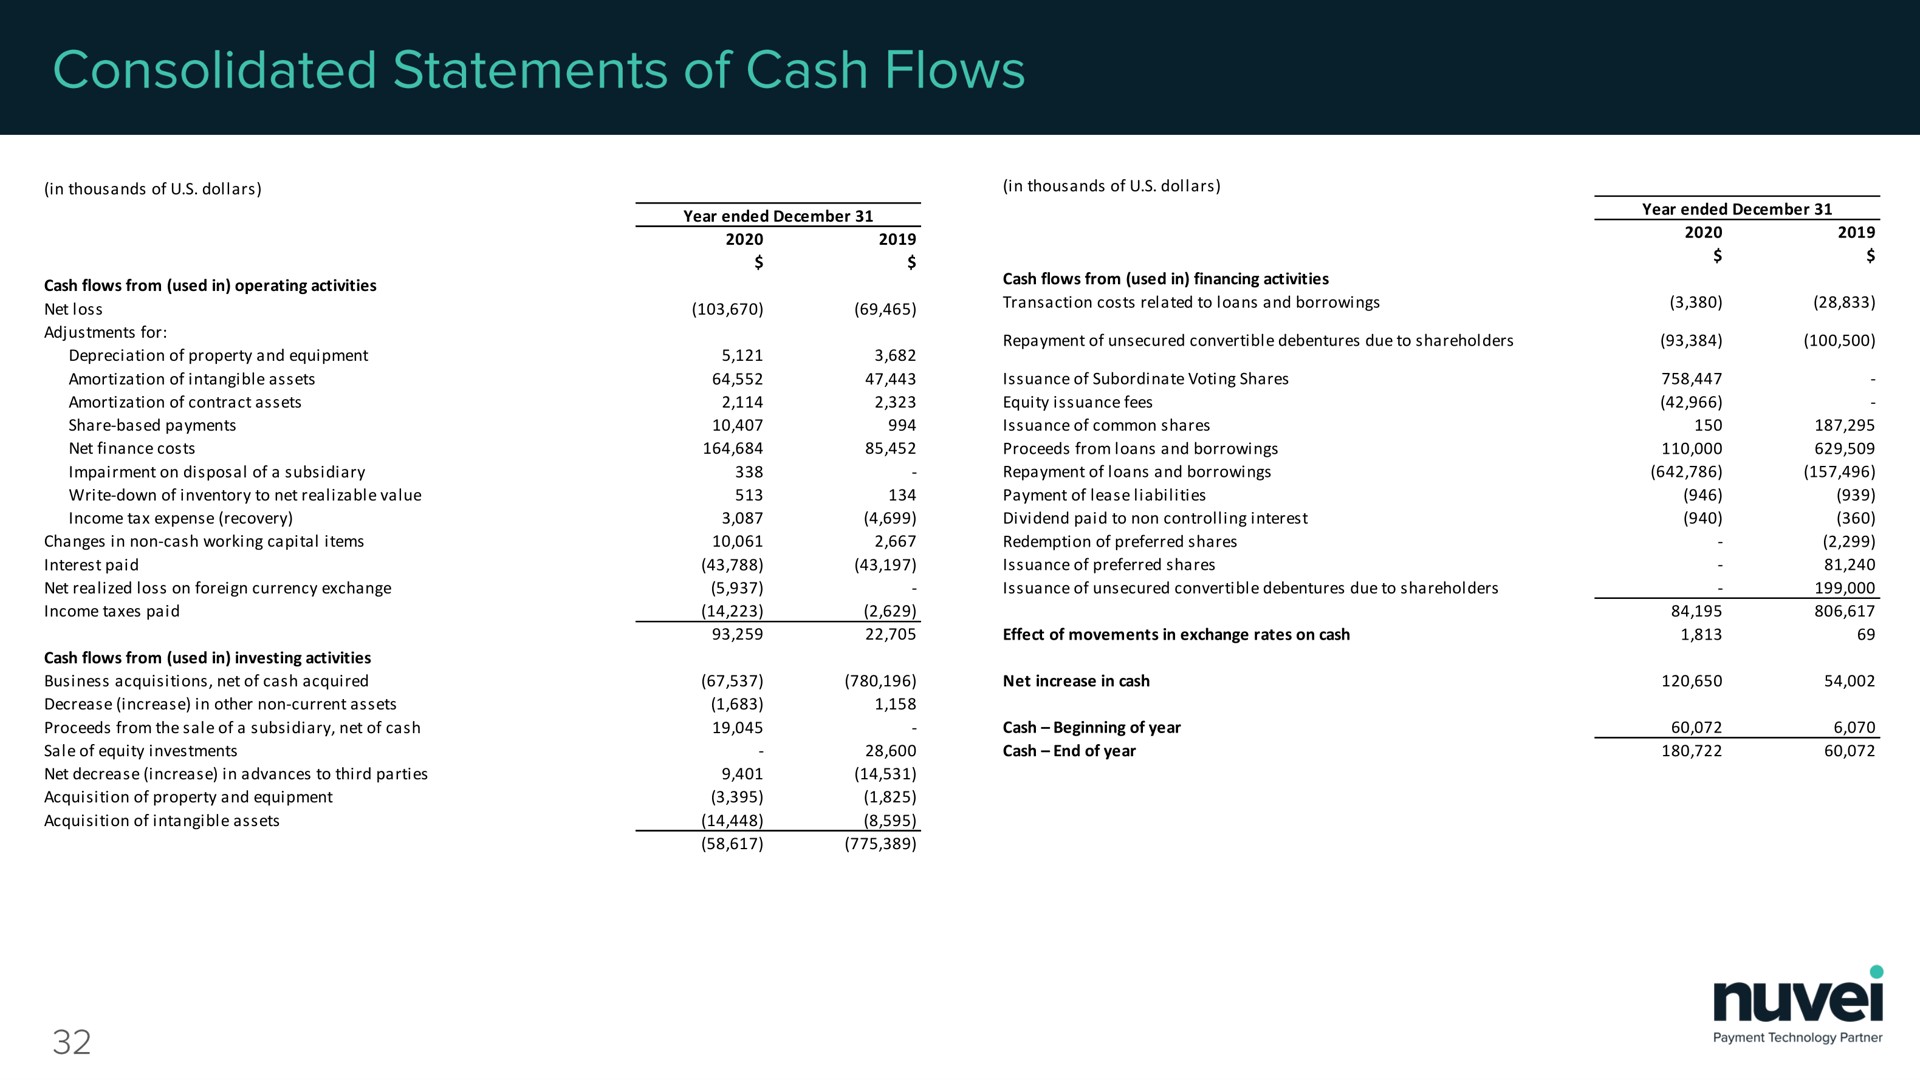 consolidated statements of cash flows | Nuvei